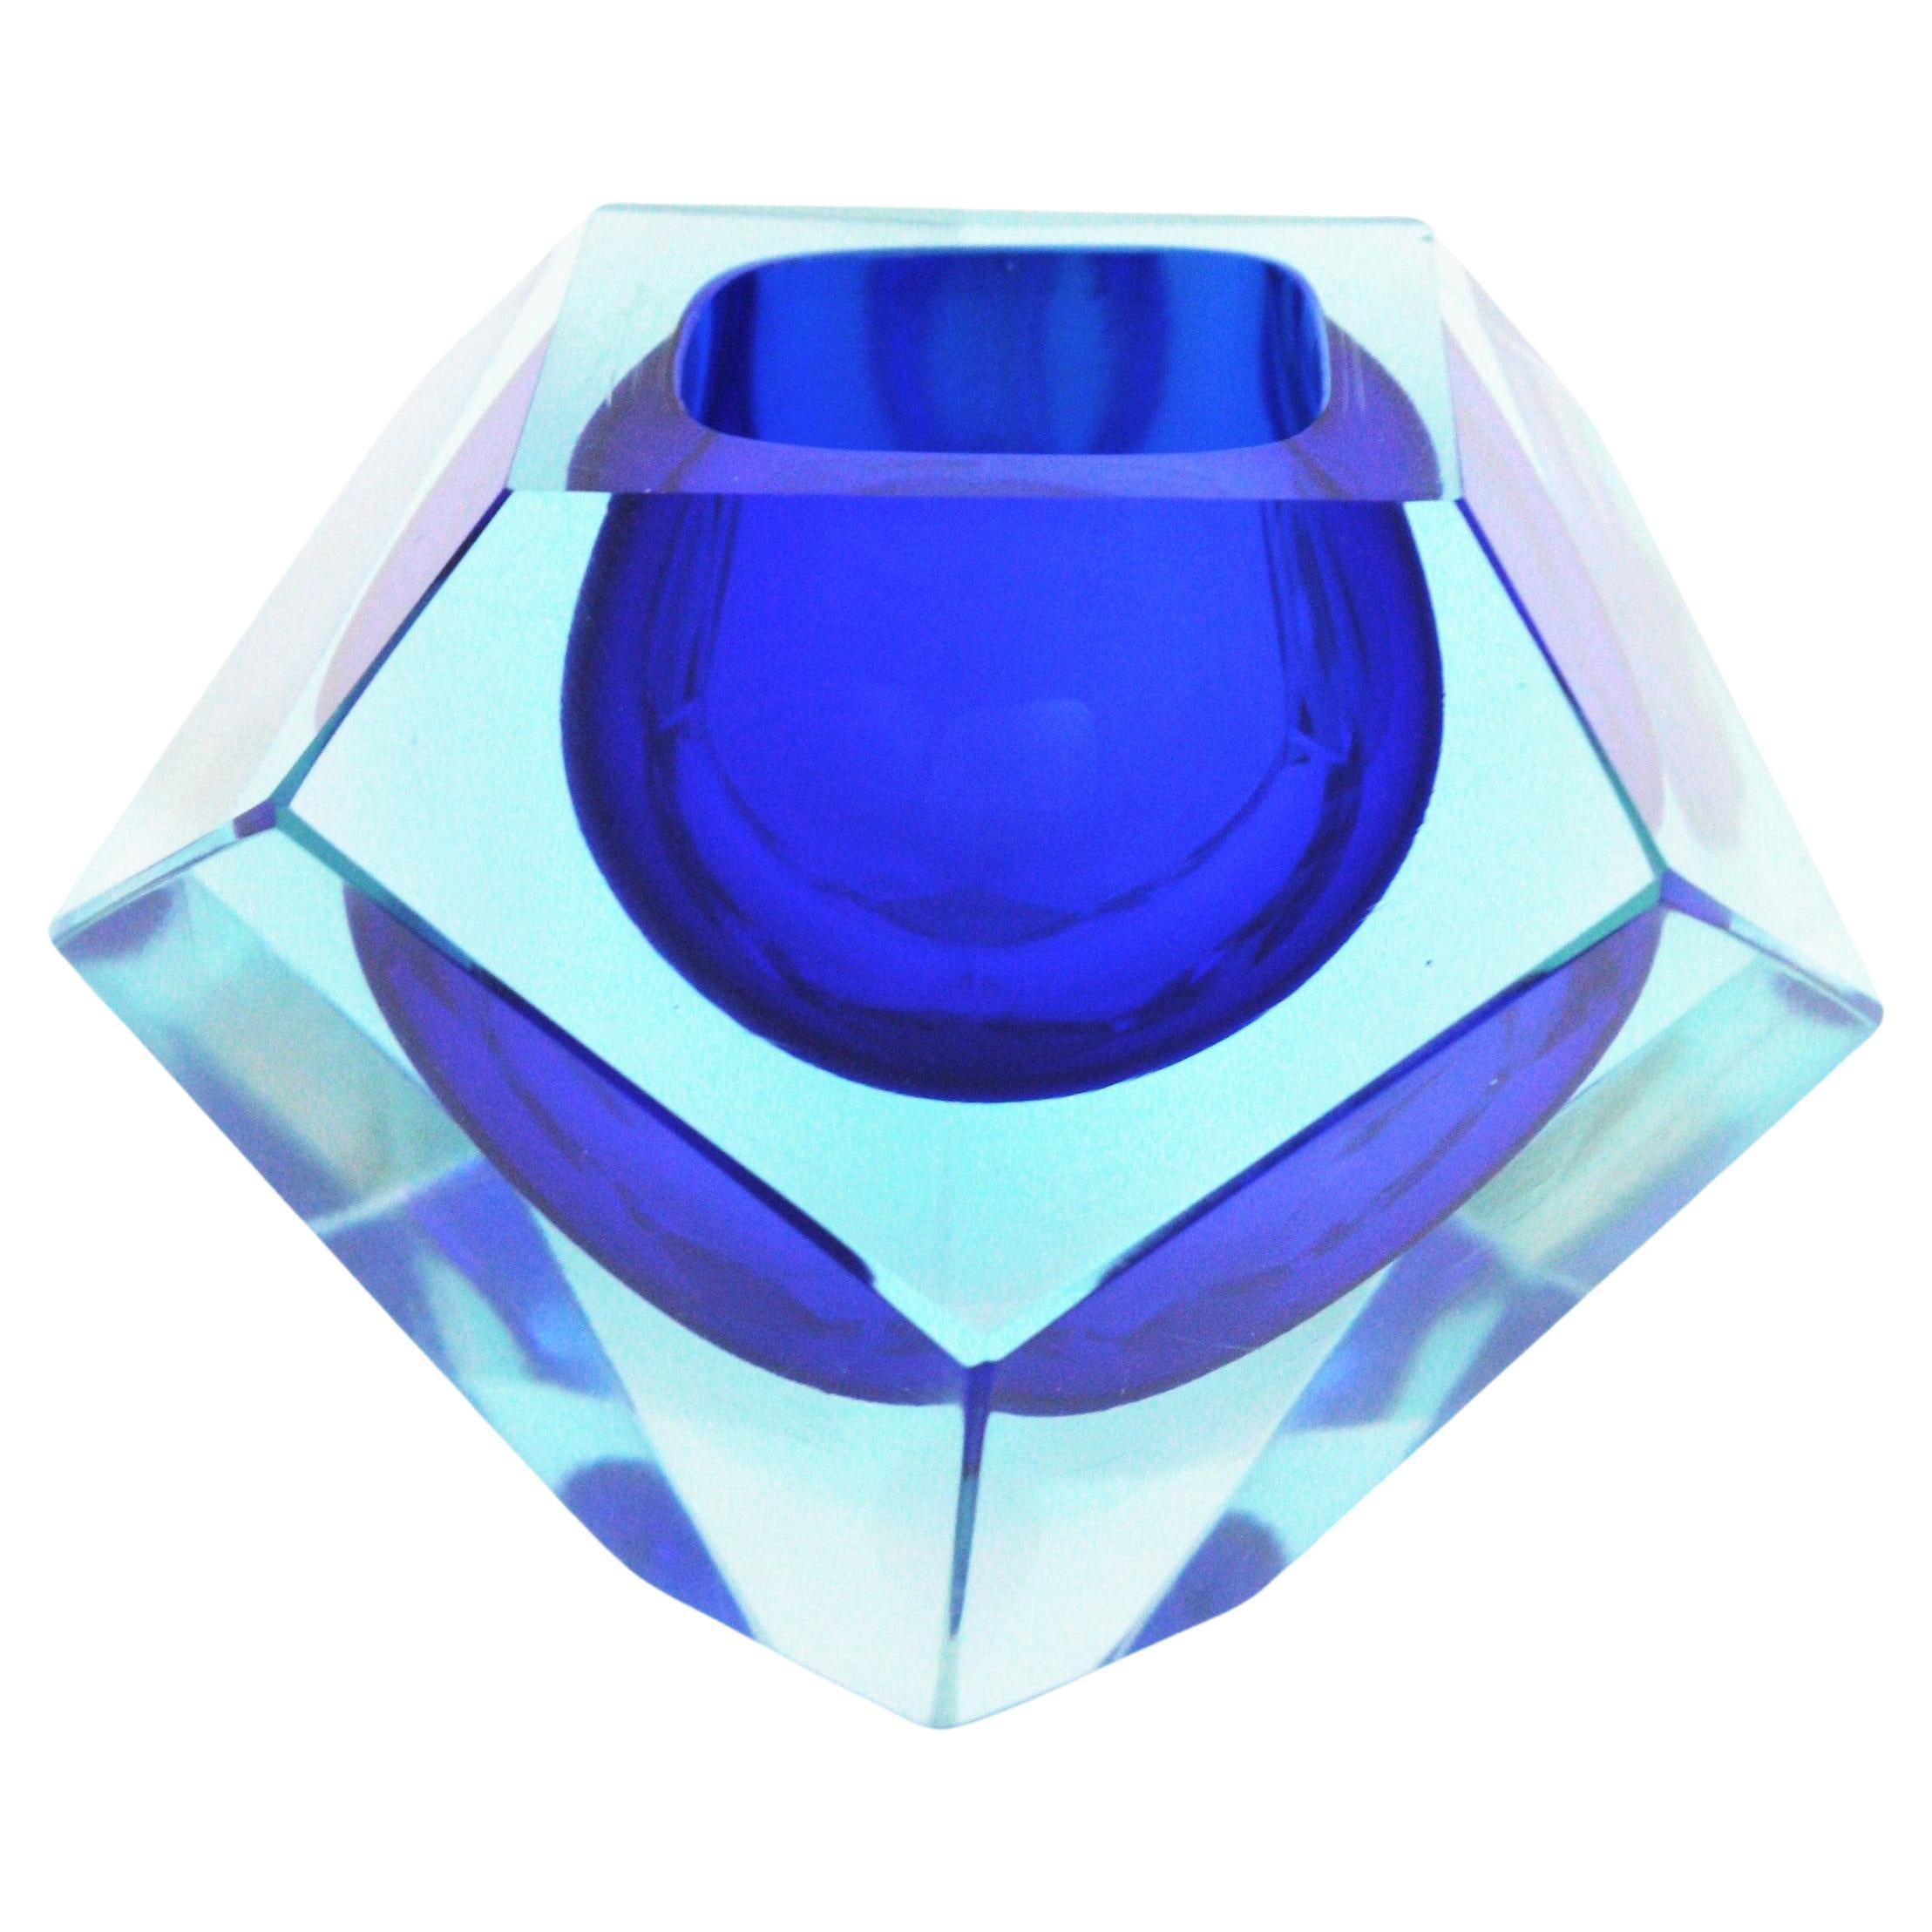 Eye-catching diamond shaped faceted Murano glass bowl in Sommerso cobalt blue and soft blue double cased glass into clear glass, Italy, 1950s.
Attributed to Flavio Poli for Seguso Vetri d'Arte.
Useful as jewerly bowl, candy bowl, vide poche or